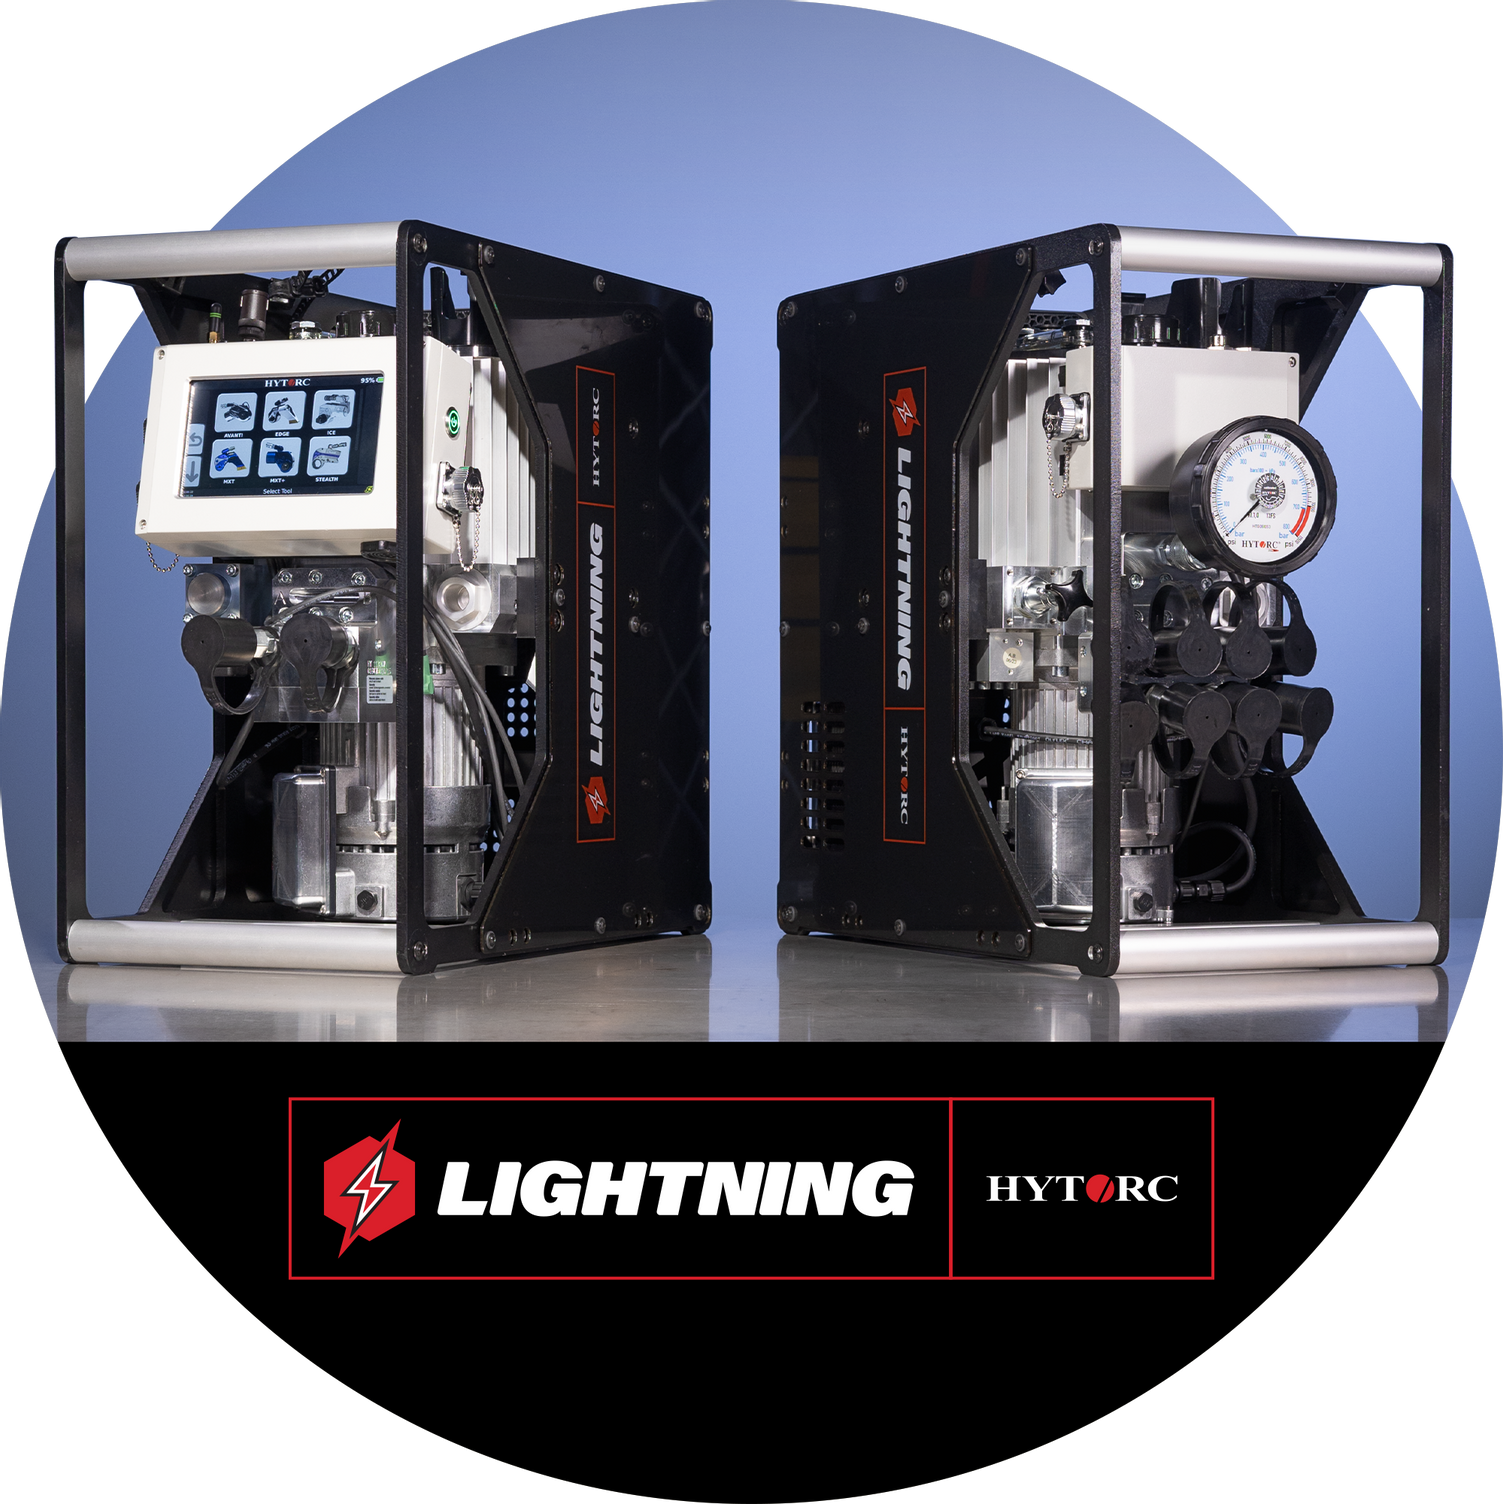 The LIGHTNING Smart and the LIGHTNING Standard battery-operated hydraulic pumps side-by-side